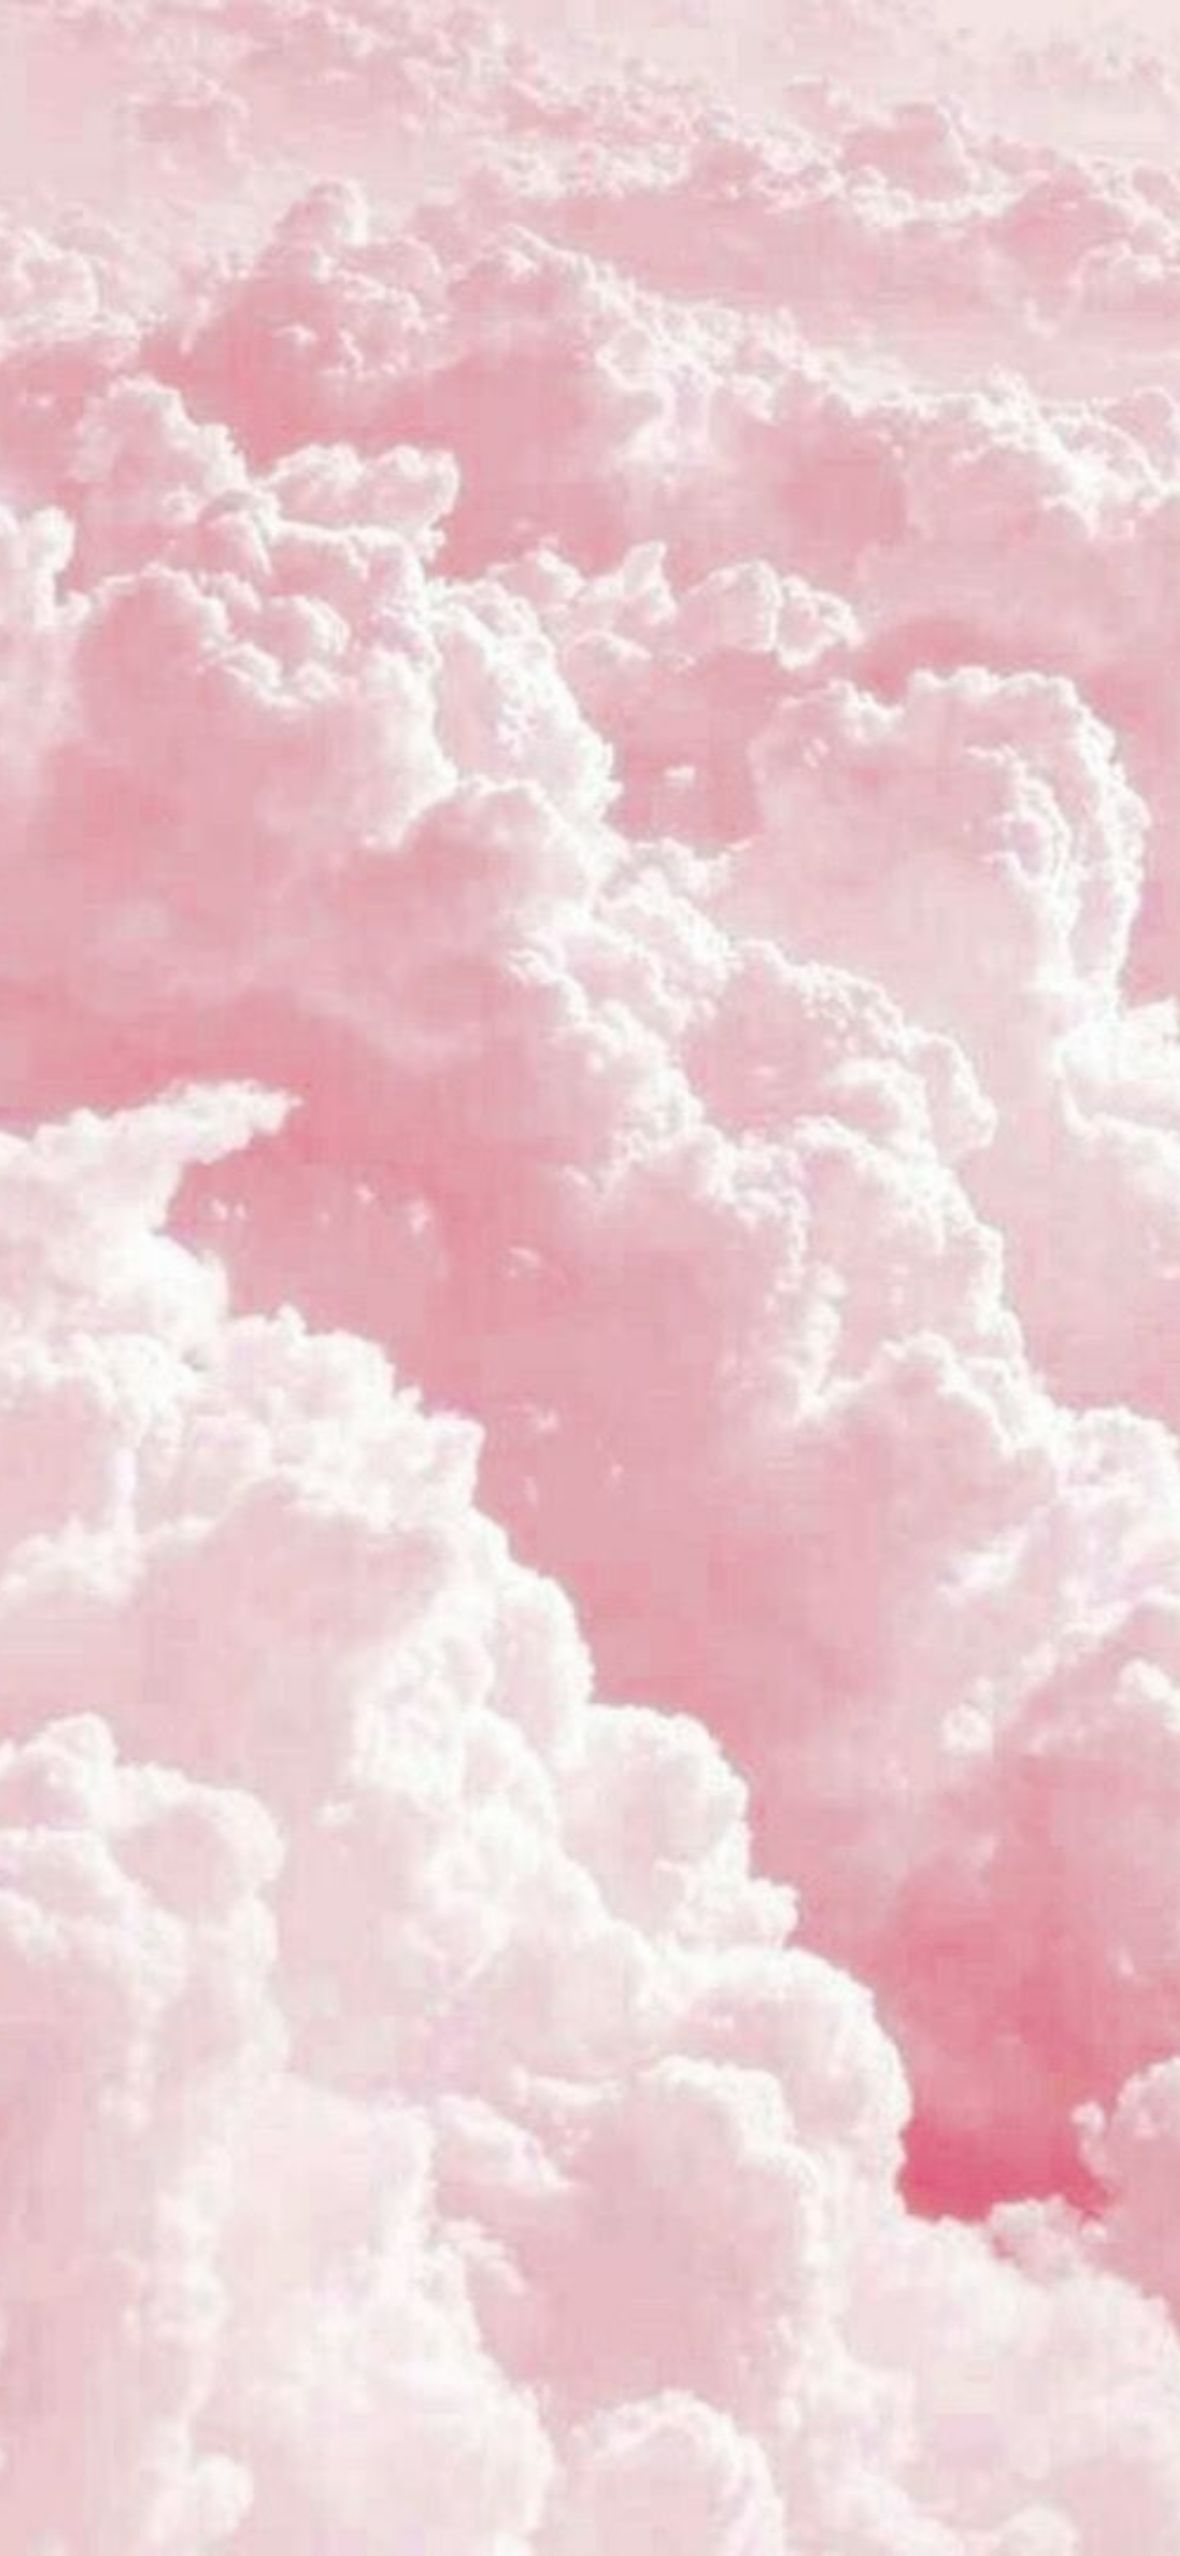 Pink aesthetic background with white clouds in the sky - Soft pink, light pink